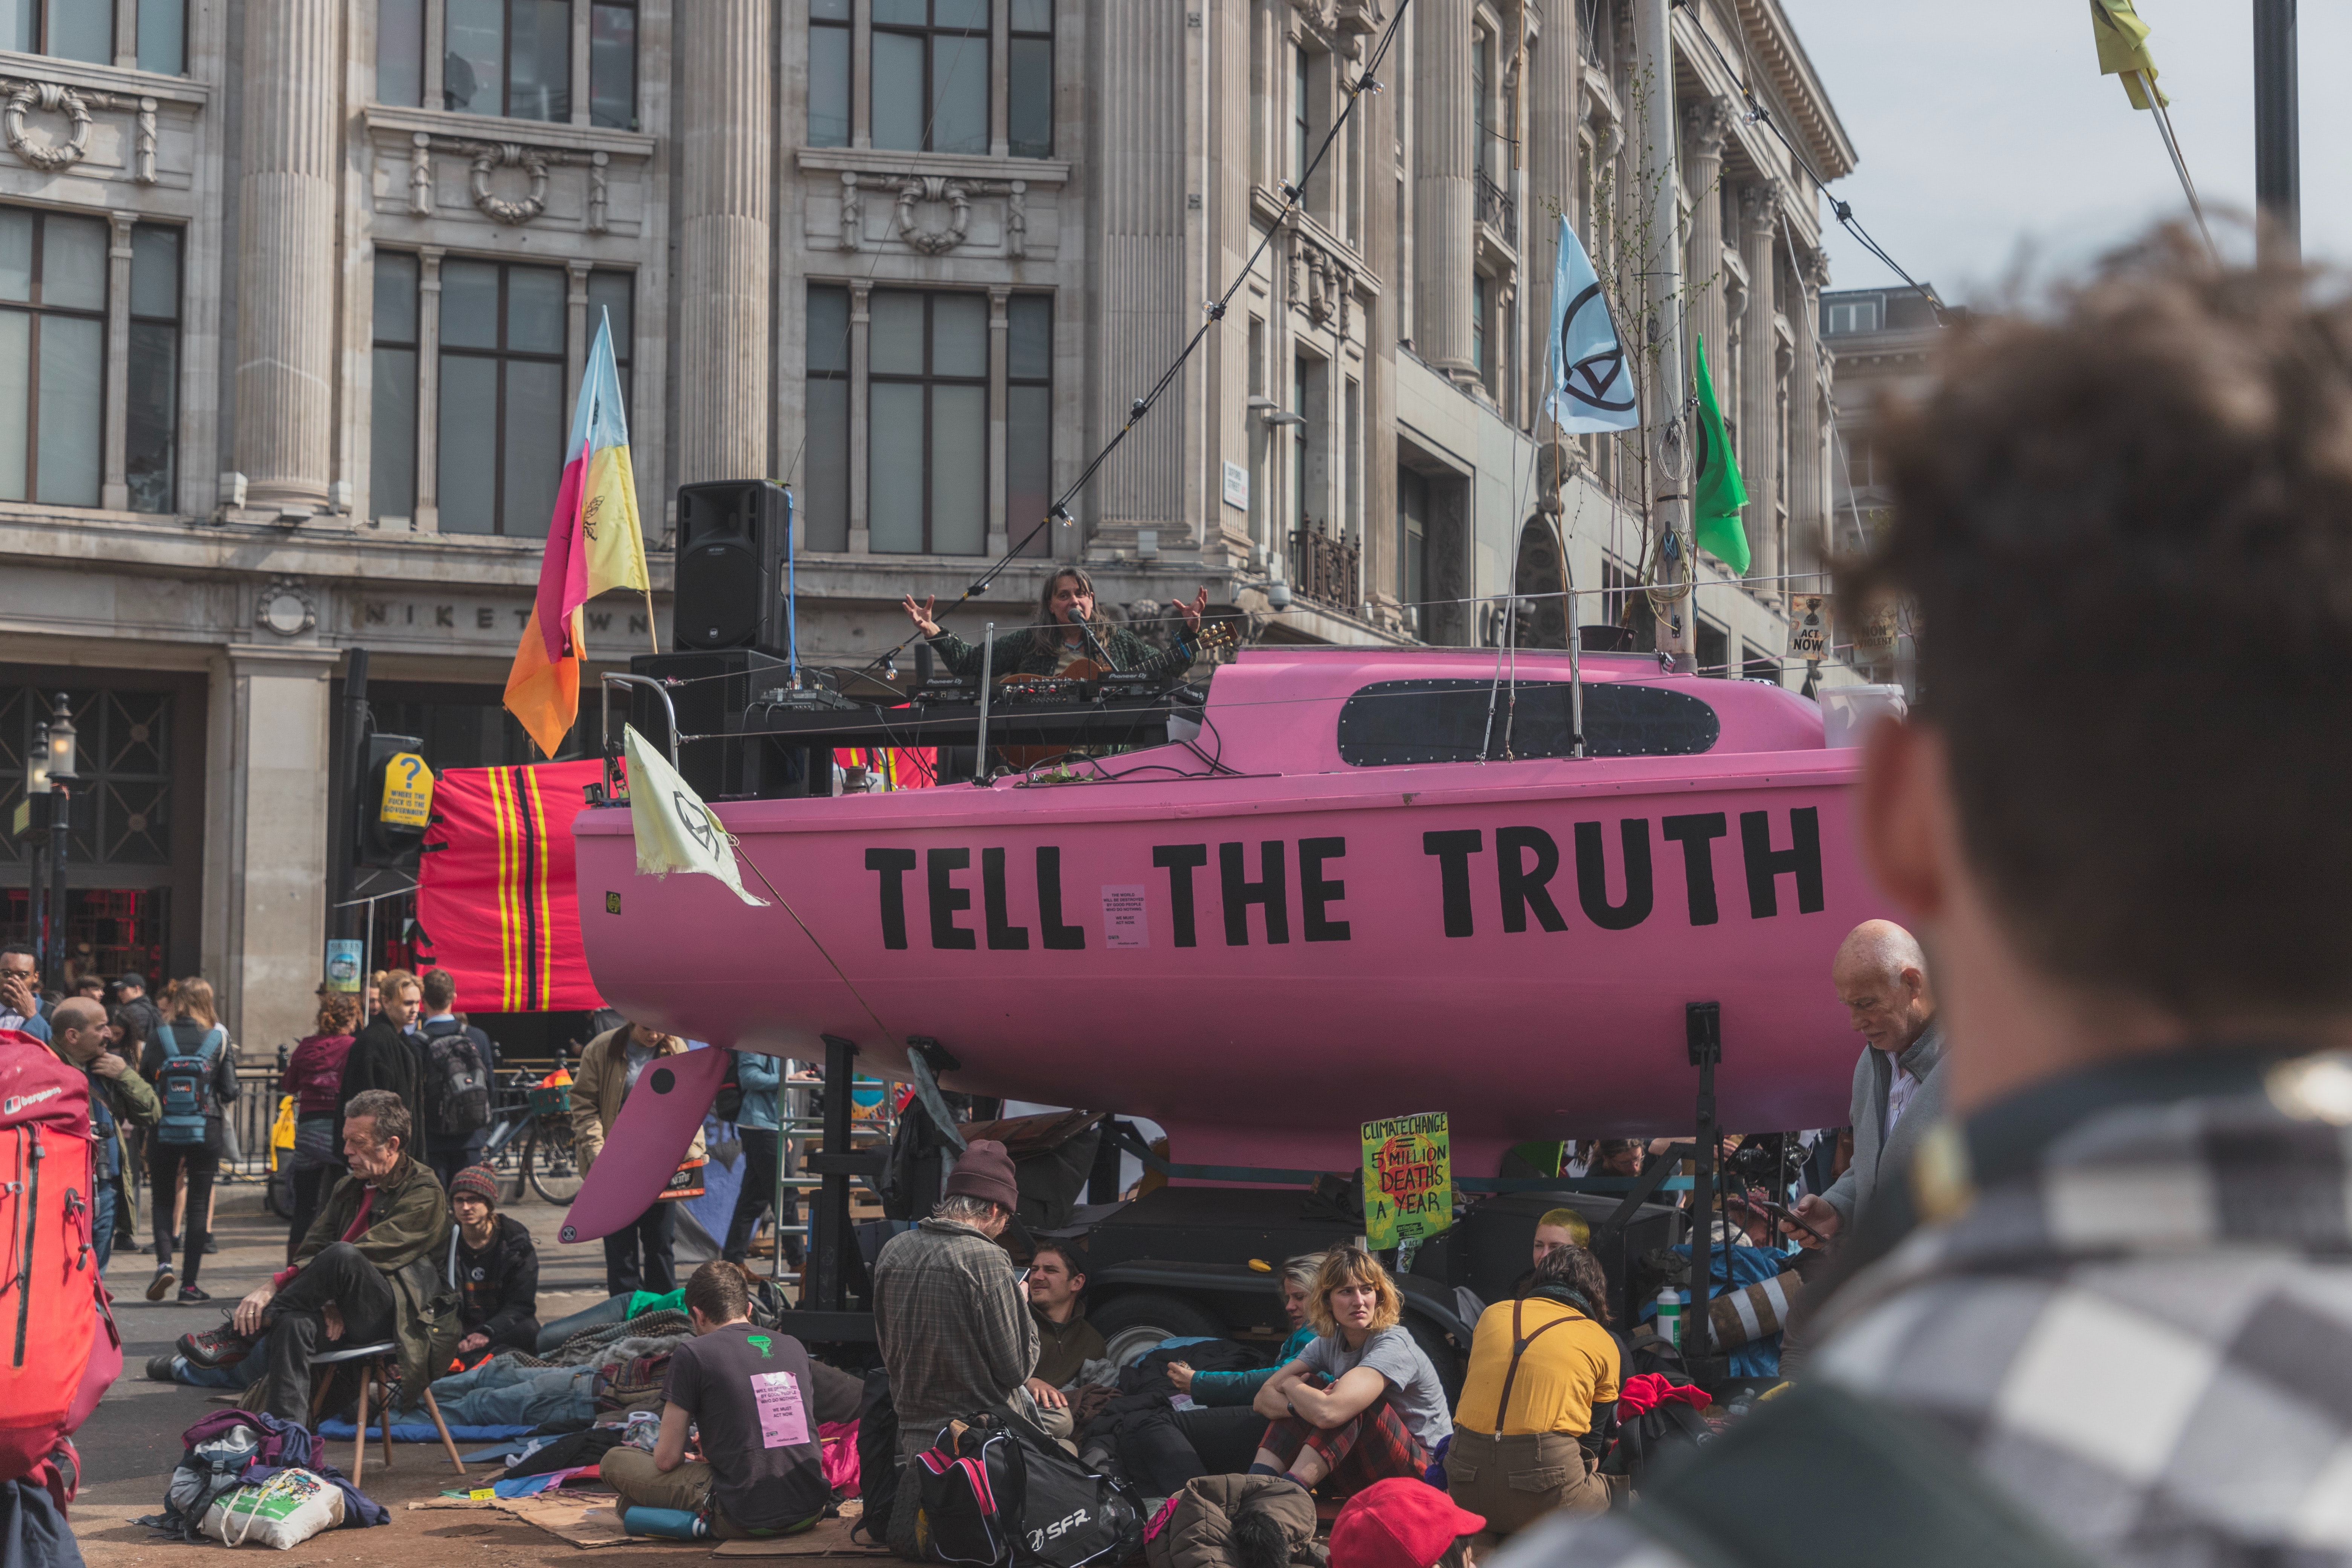 Protest in the middle of the road - boat with tell the truth - Photo by Joël de Vriend on Unsplash